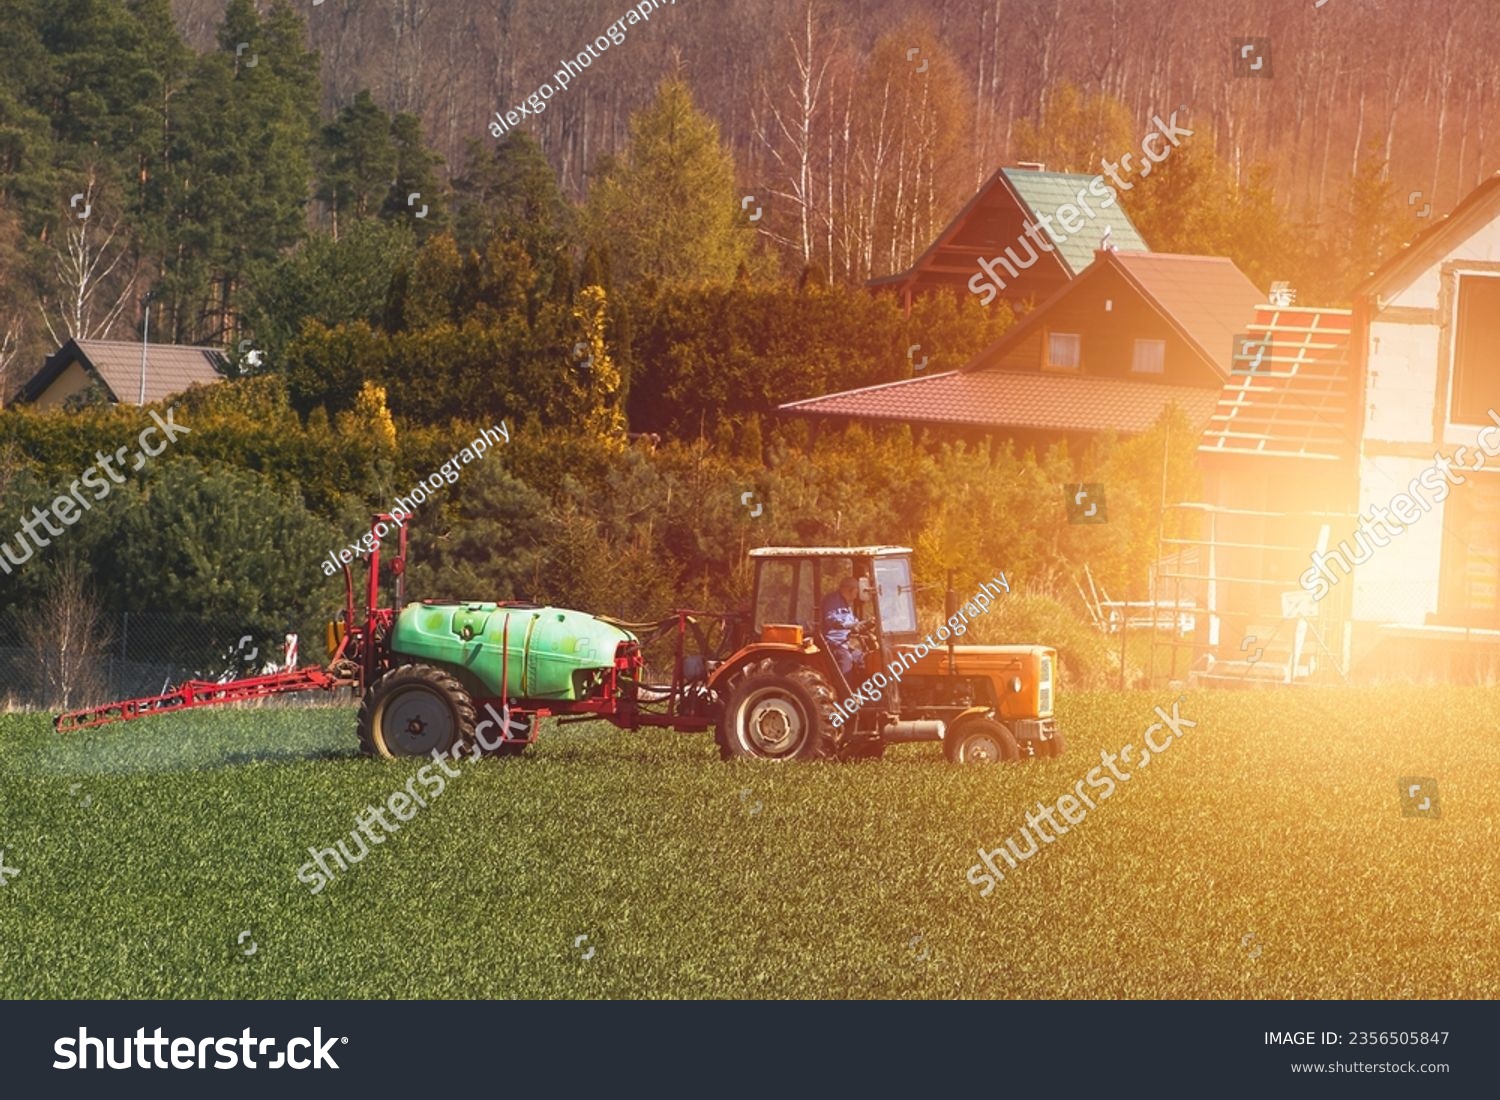 Efficient Agricultural Operations. Machinery Cultivating Fields and Harvesting at Sunset. Rural landscape. #2356505847